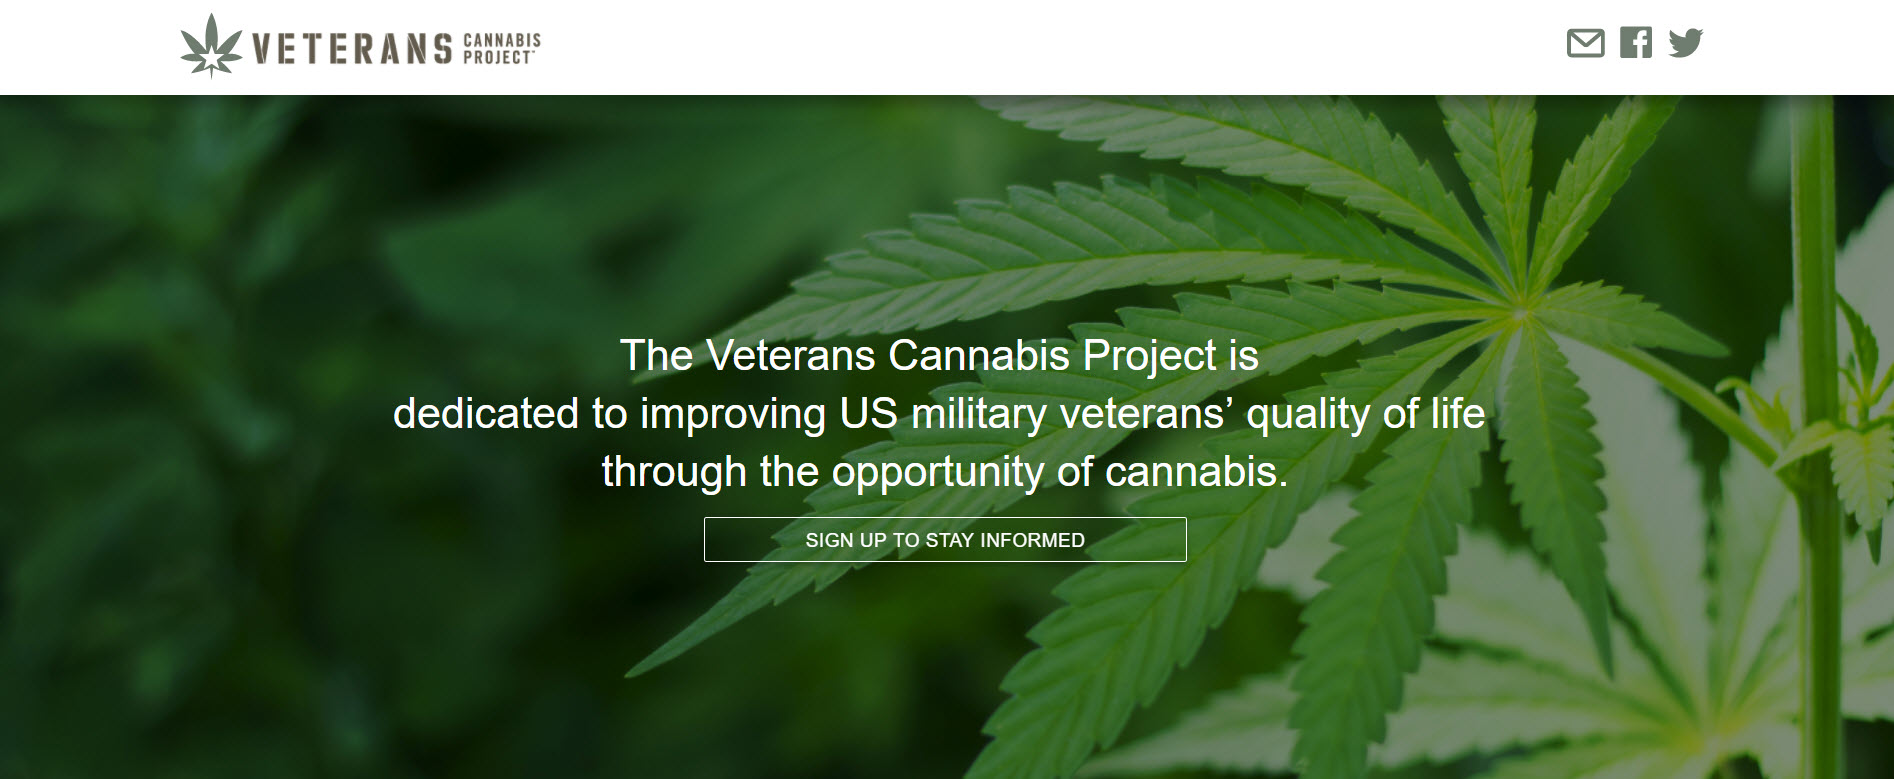 Veterans Cannabis Project: Policy Challenges